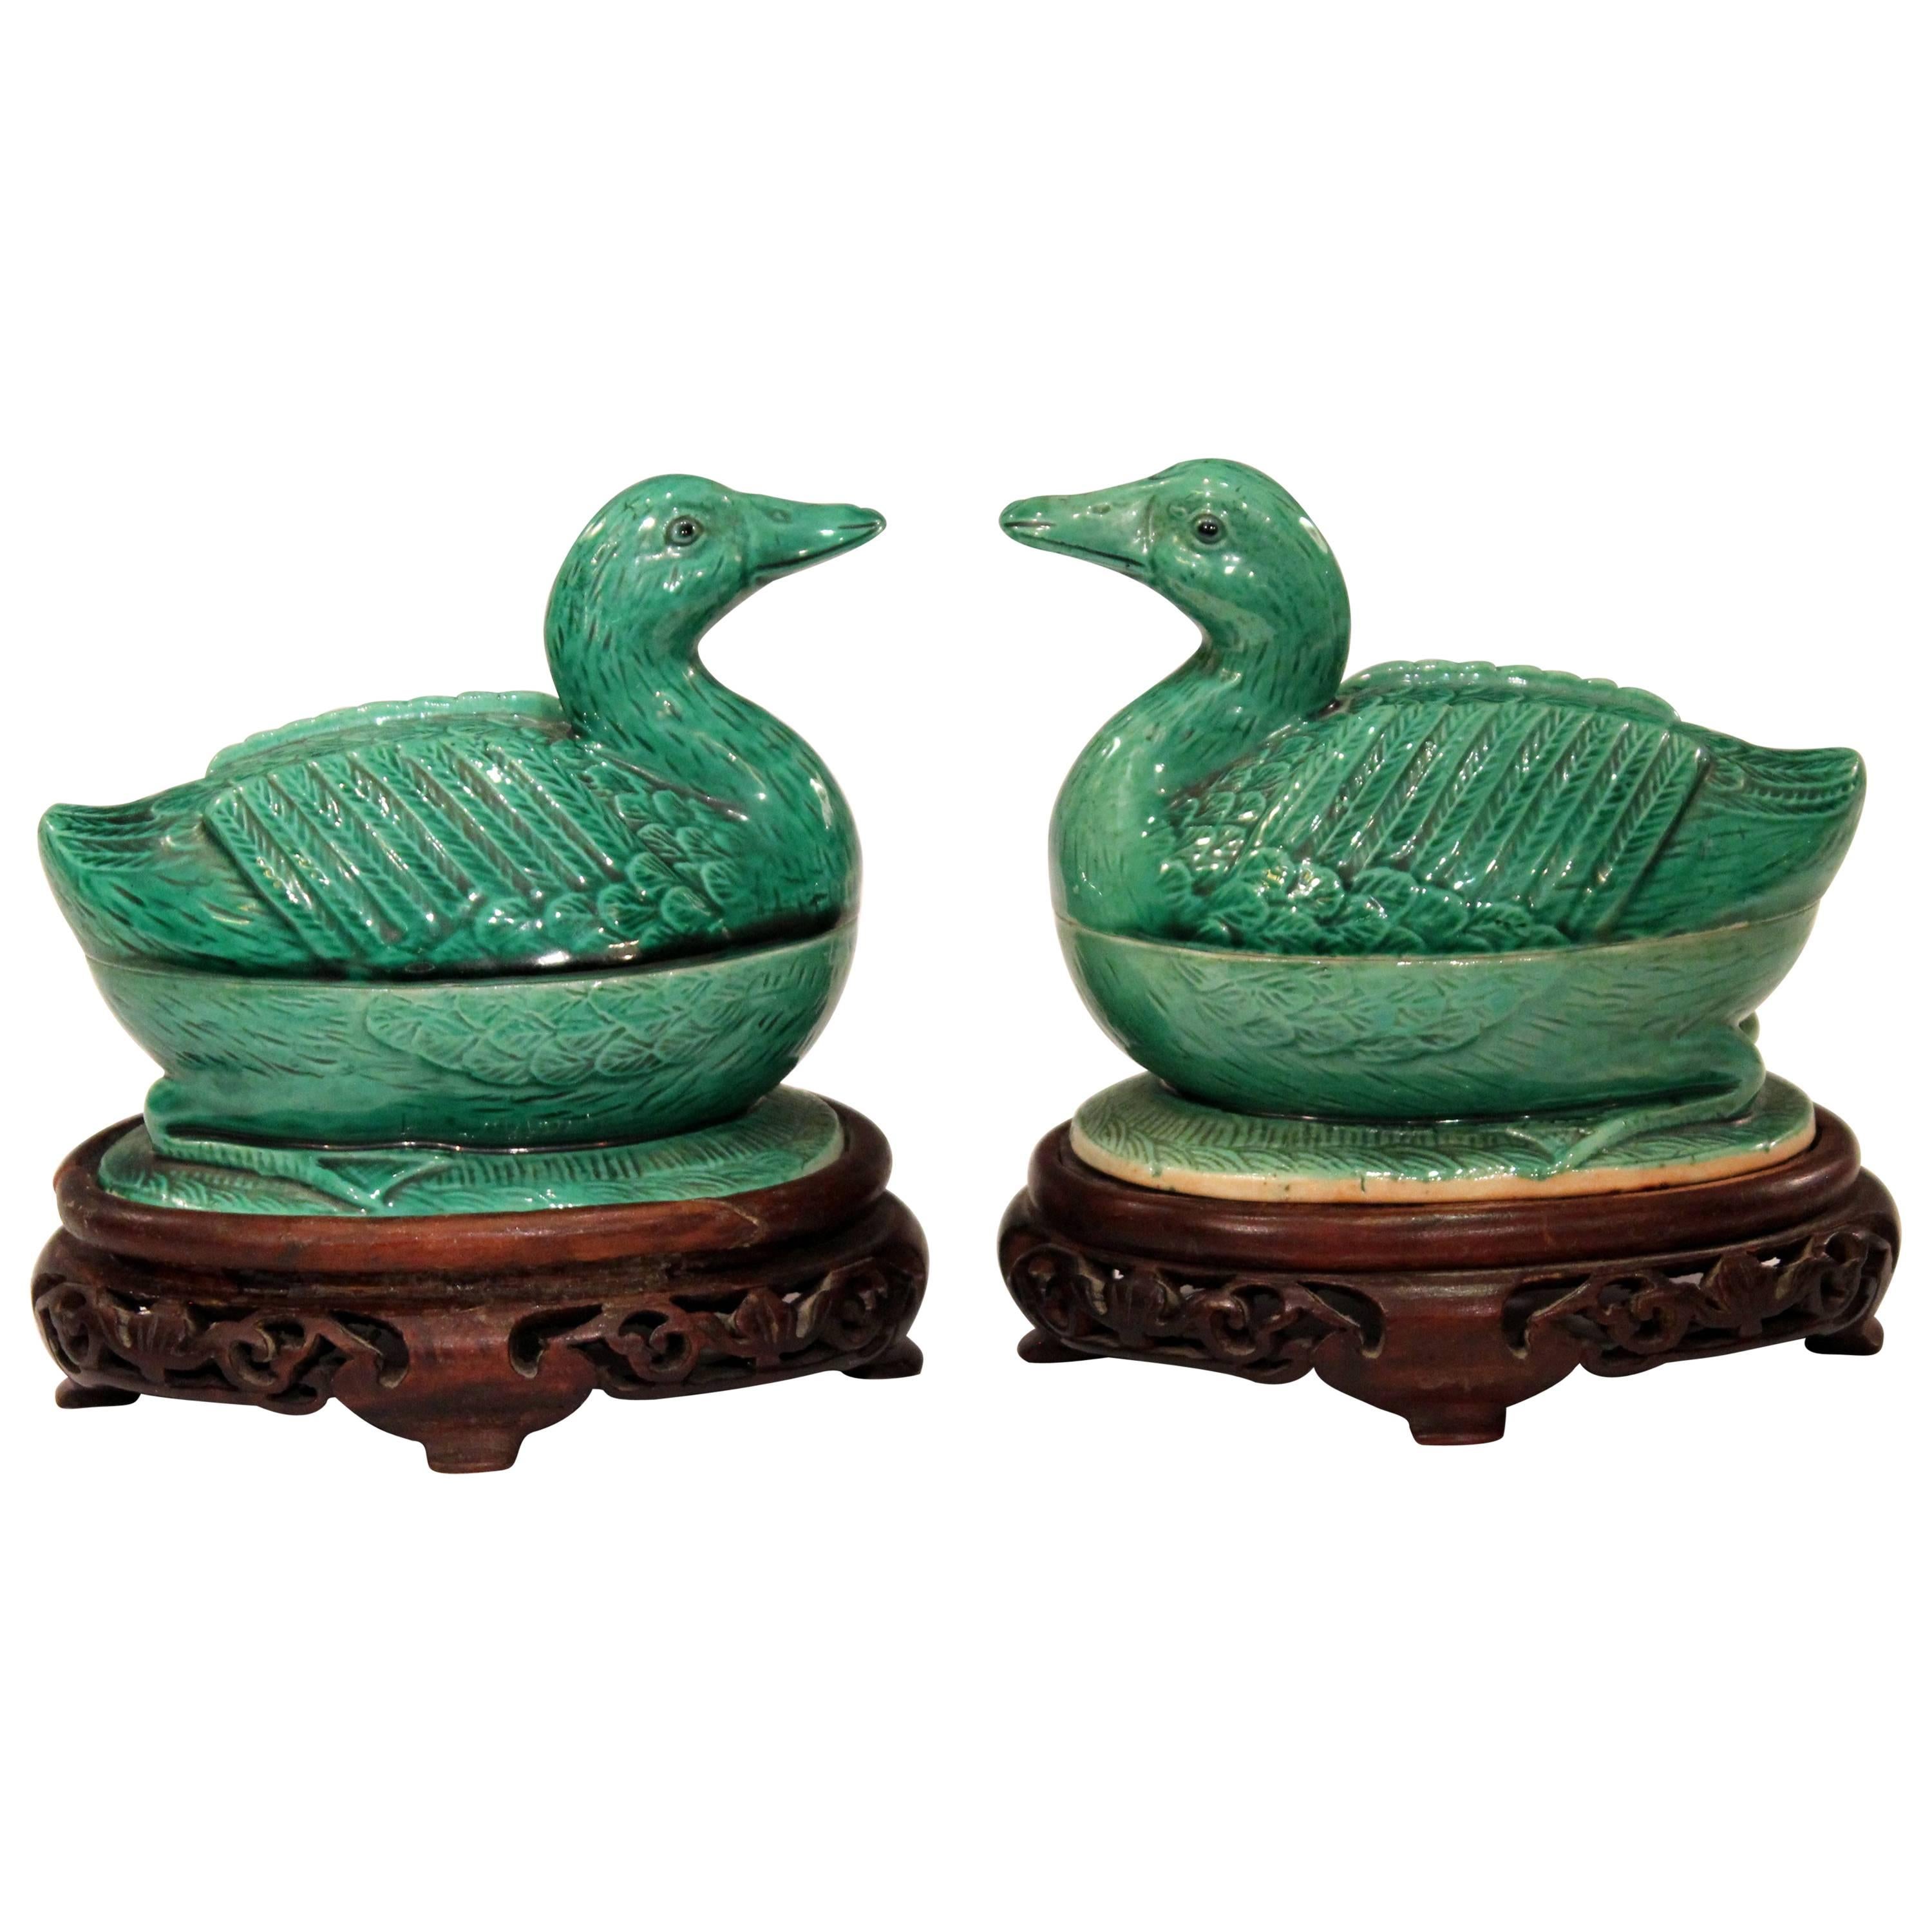 Pair of Chinese Porcelain Bird Figure Covered Boxes Ducks Geese Marked